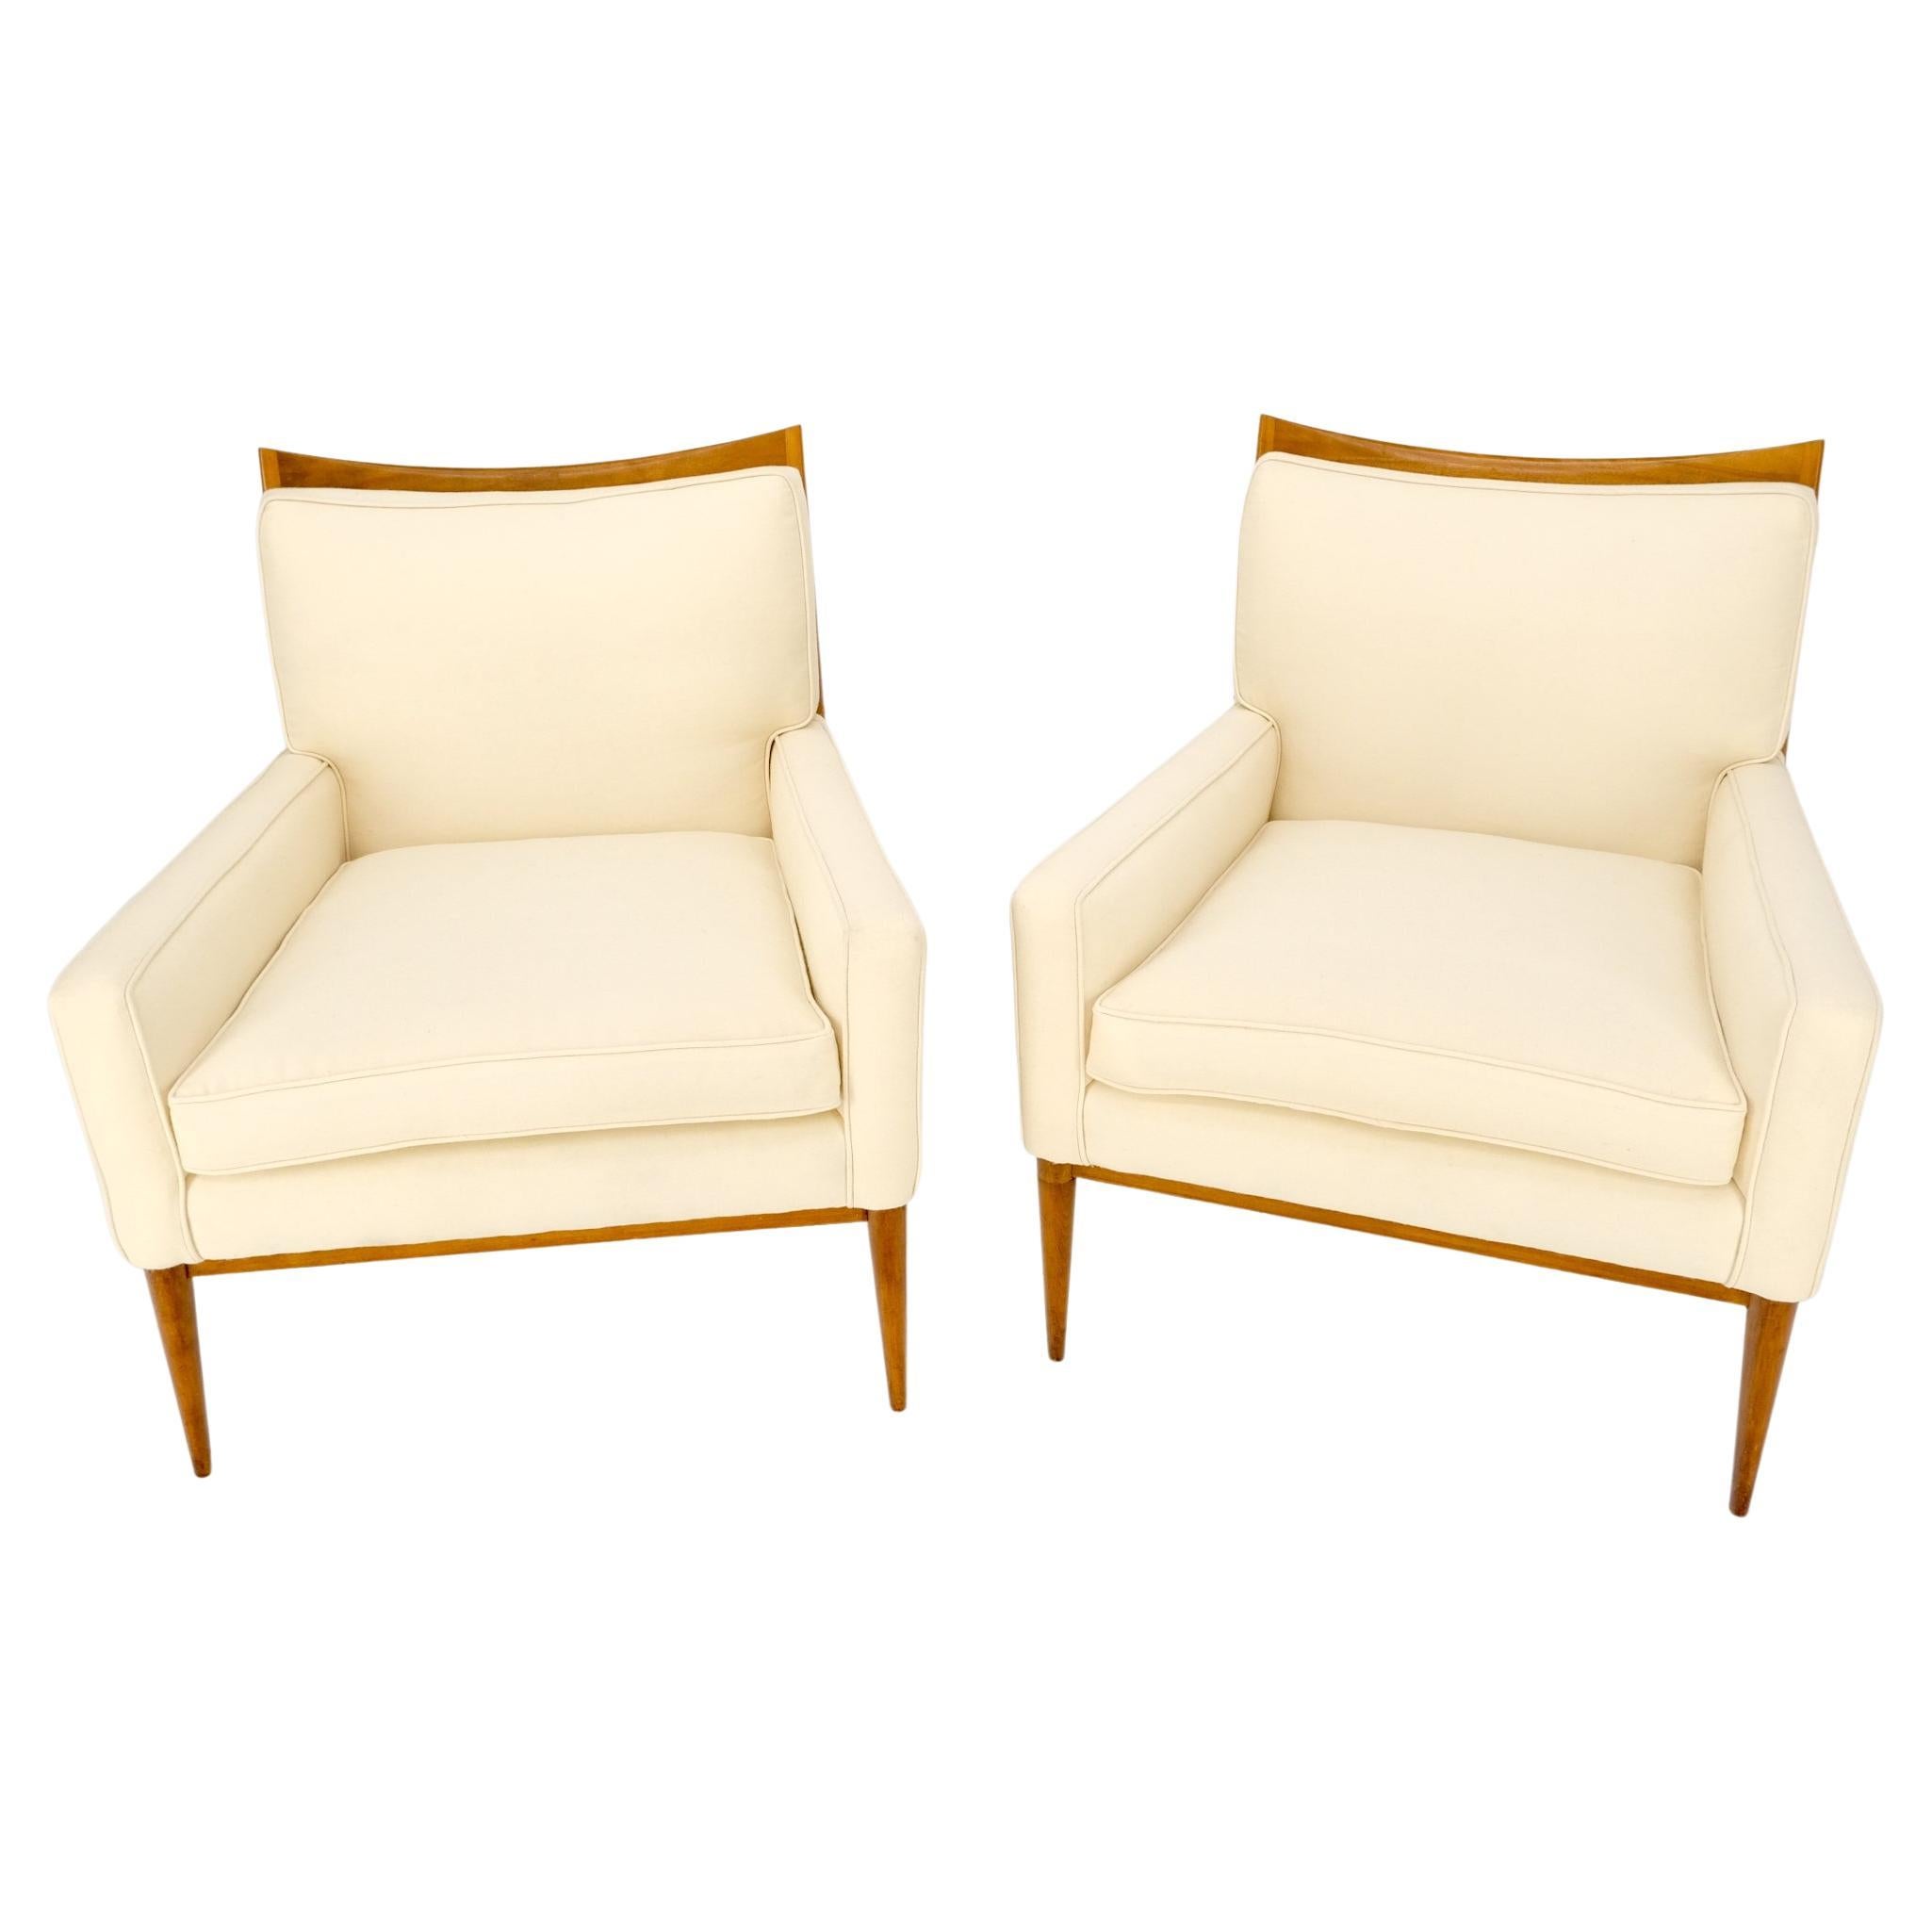 American Pair of Mid Century Modern McCobb Chairs Newly Upholstered in Cream Virgin Wool For Sale